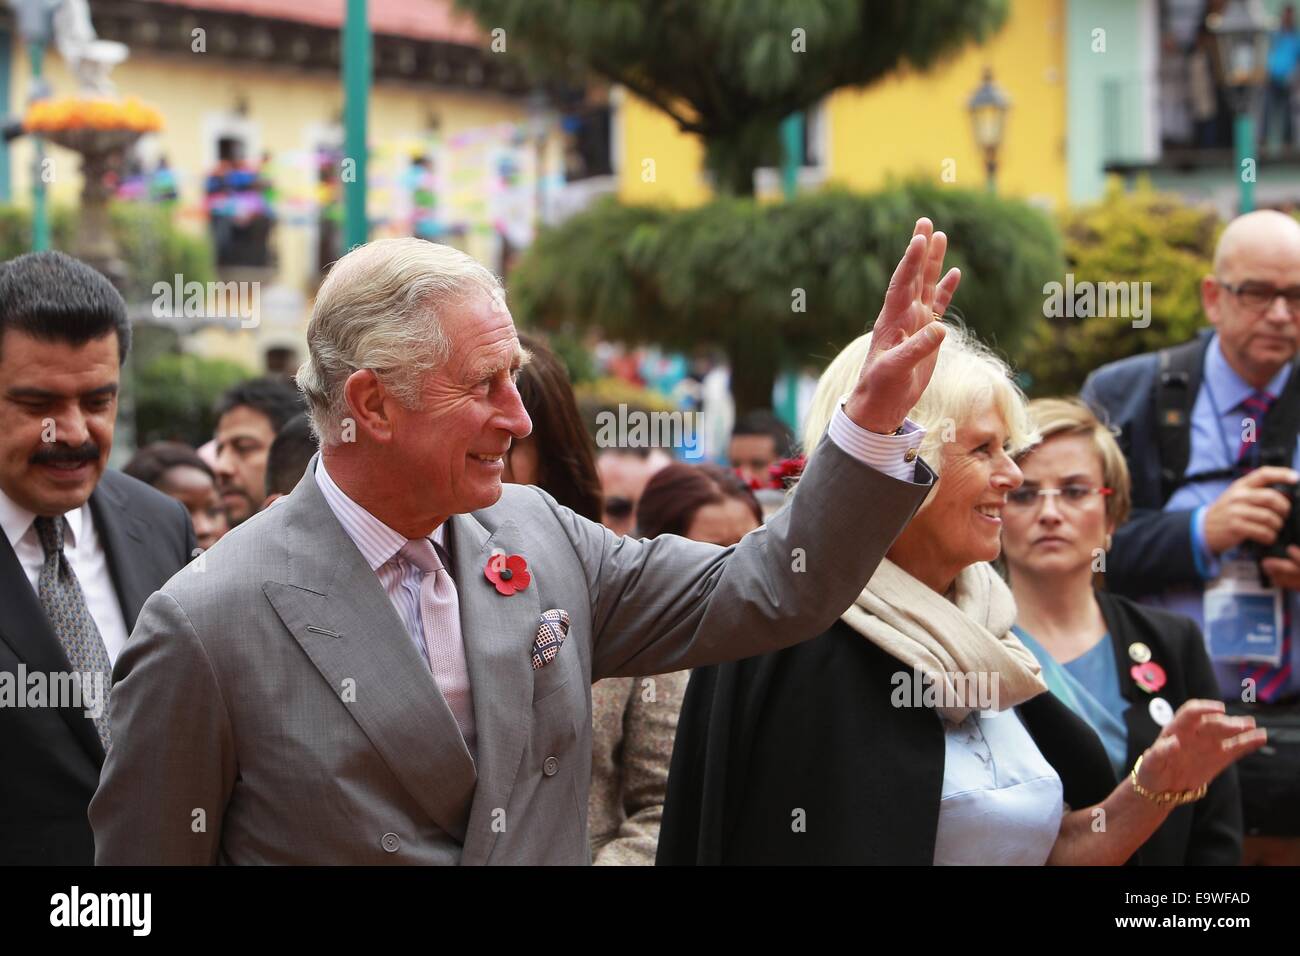 Hidalgo, Mexico. 2nd Nov, 2014. British Prince Charles (L) and his wife Camilla (R Front), Duchess of Cornwall, greet residents during their visit to Mexico, in Pachuca, state of Hidalgo, Mexico, on Nov. 2, 2014. Credit:  Jose Mendez/POOL/Xinhua/Alamy Live News Stock Photo